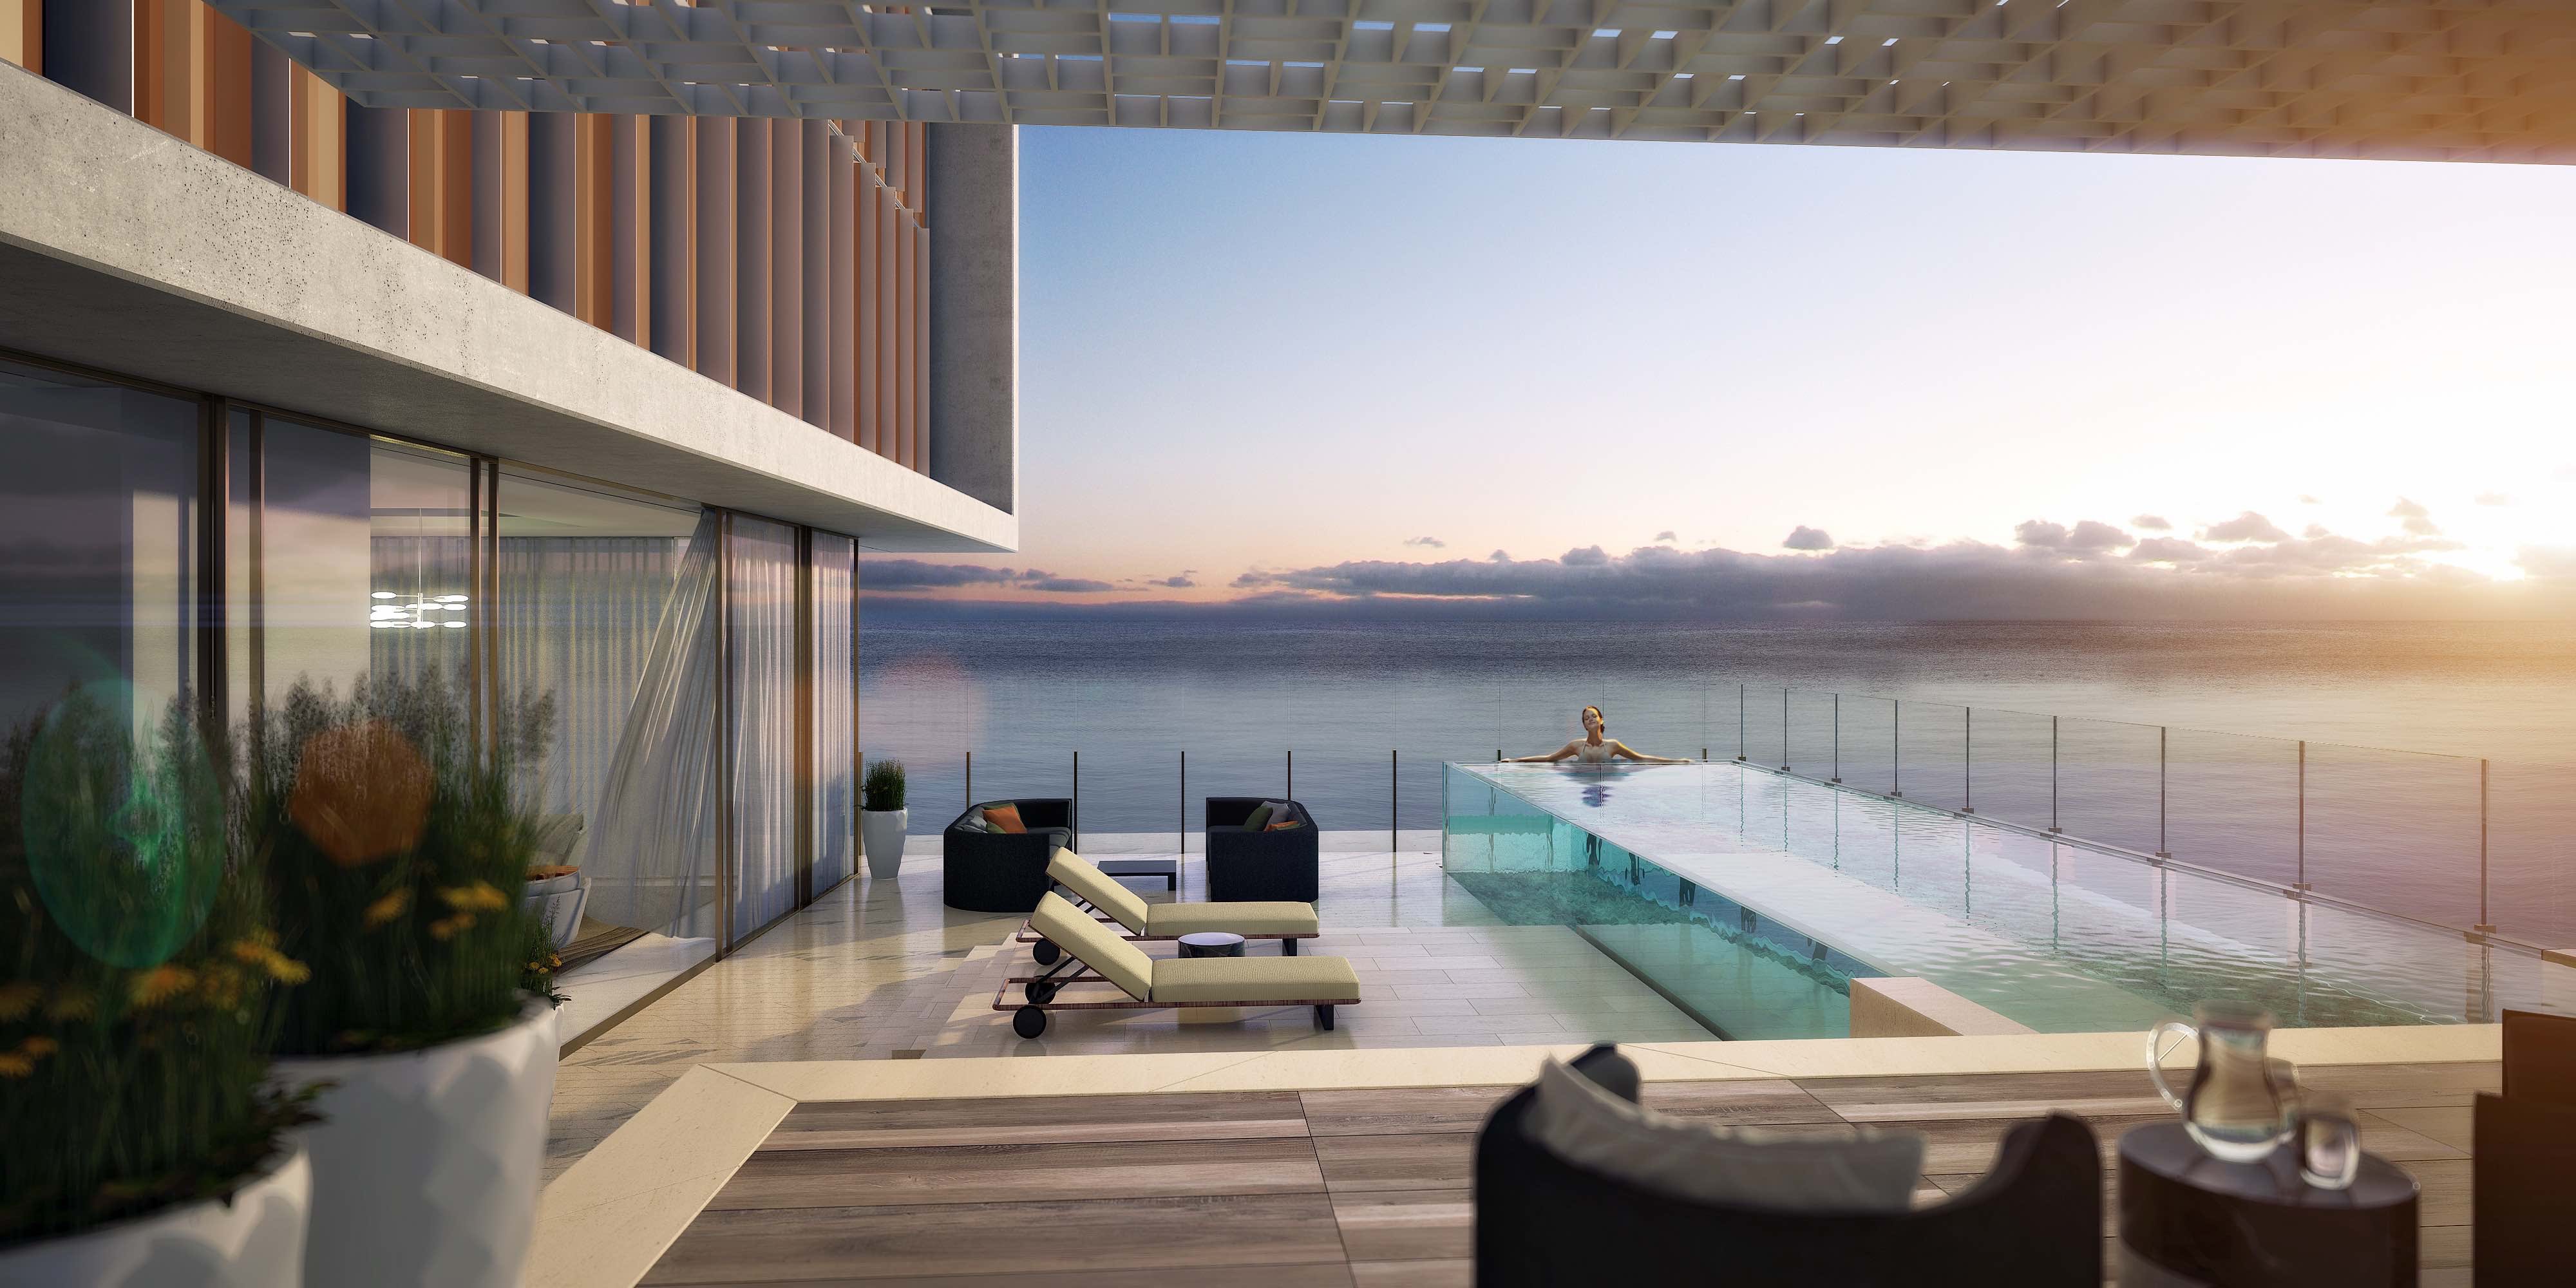 Sky Courts feature suites with magnificent landscaping to stunning acrylic pools.